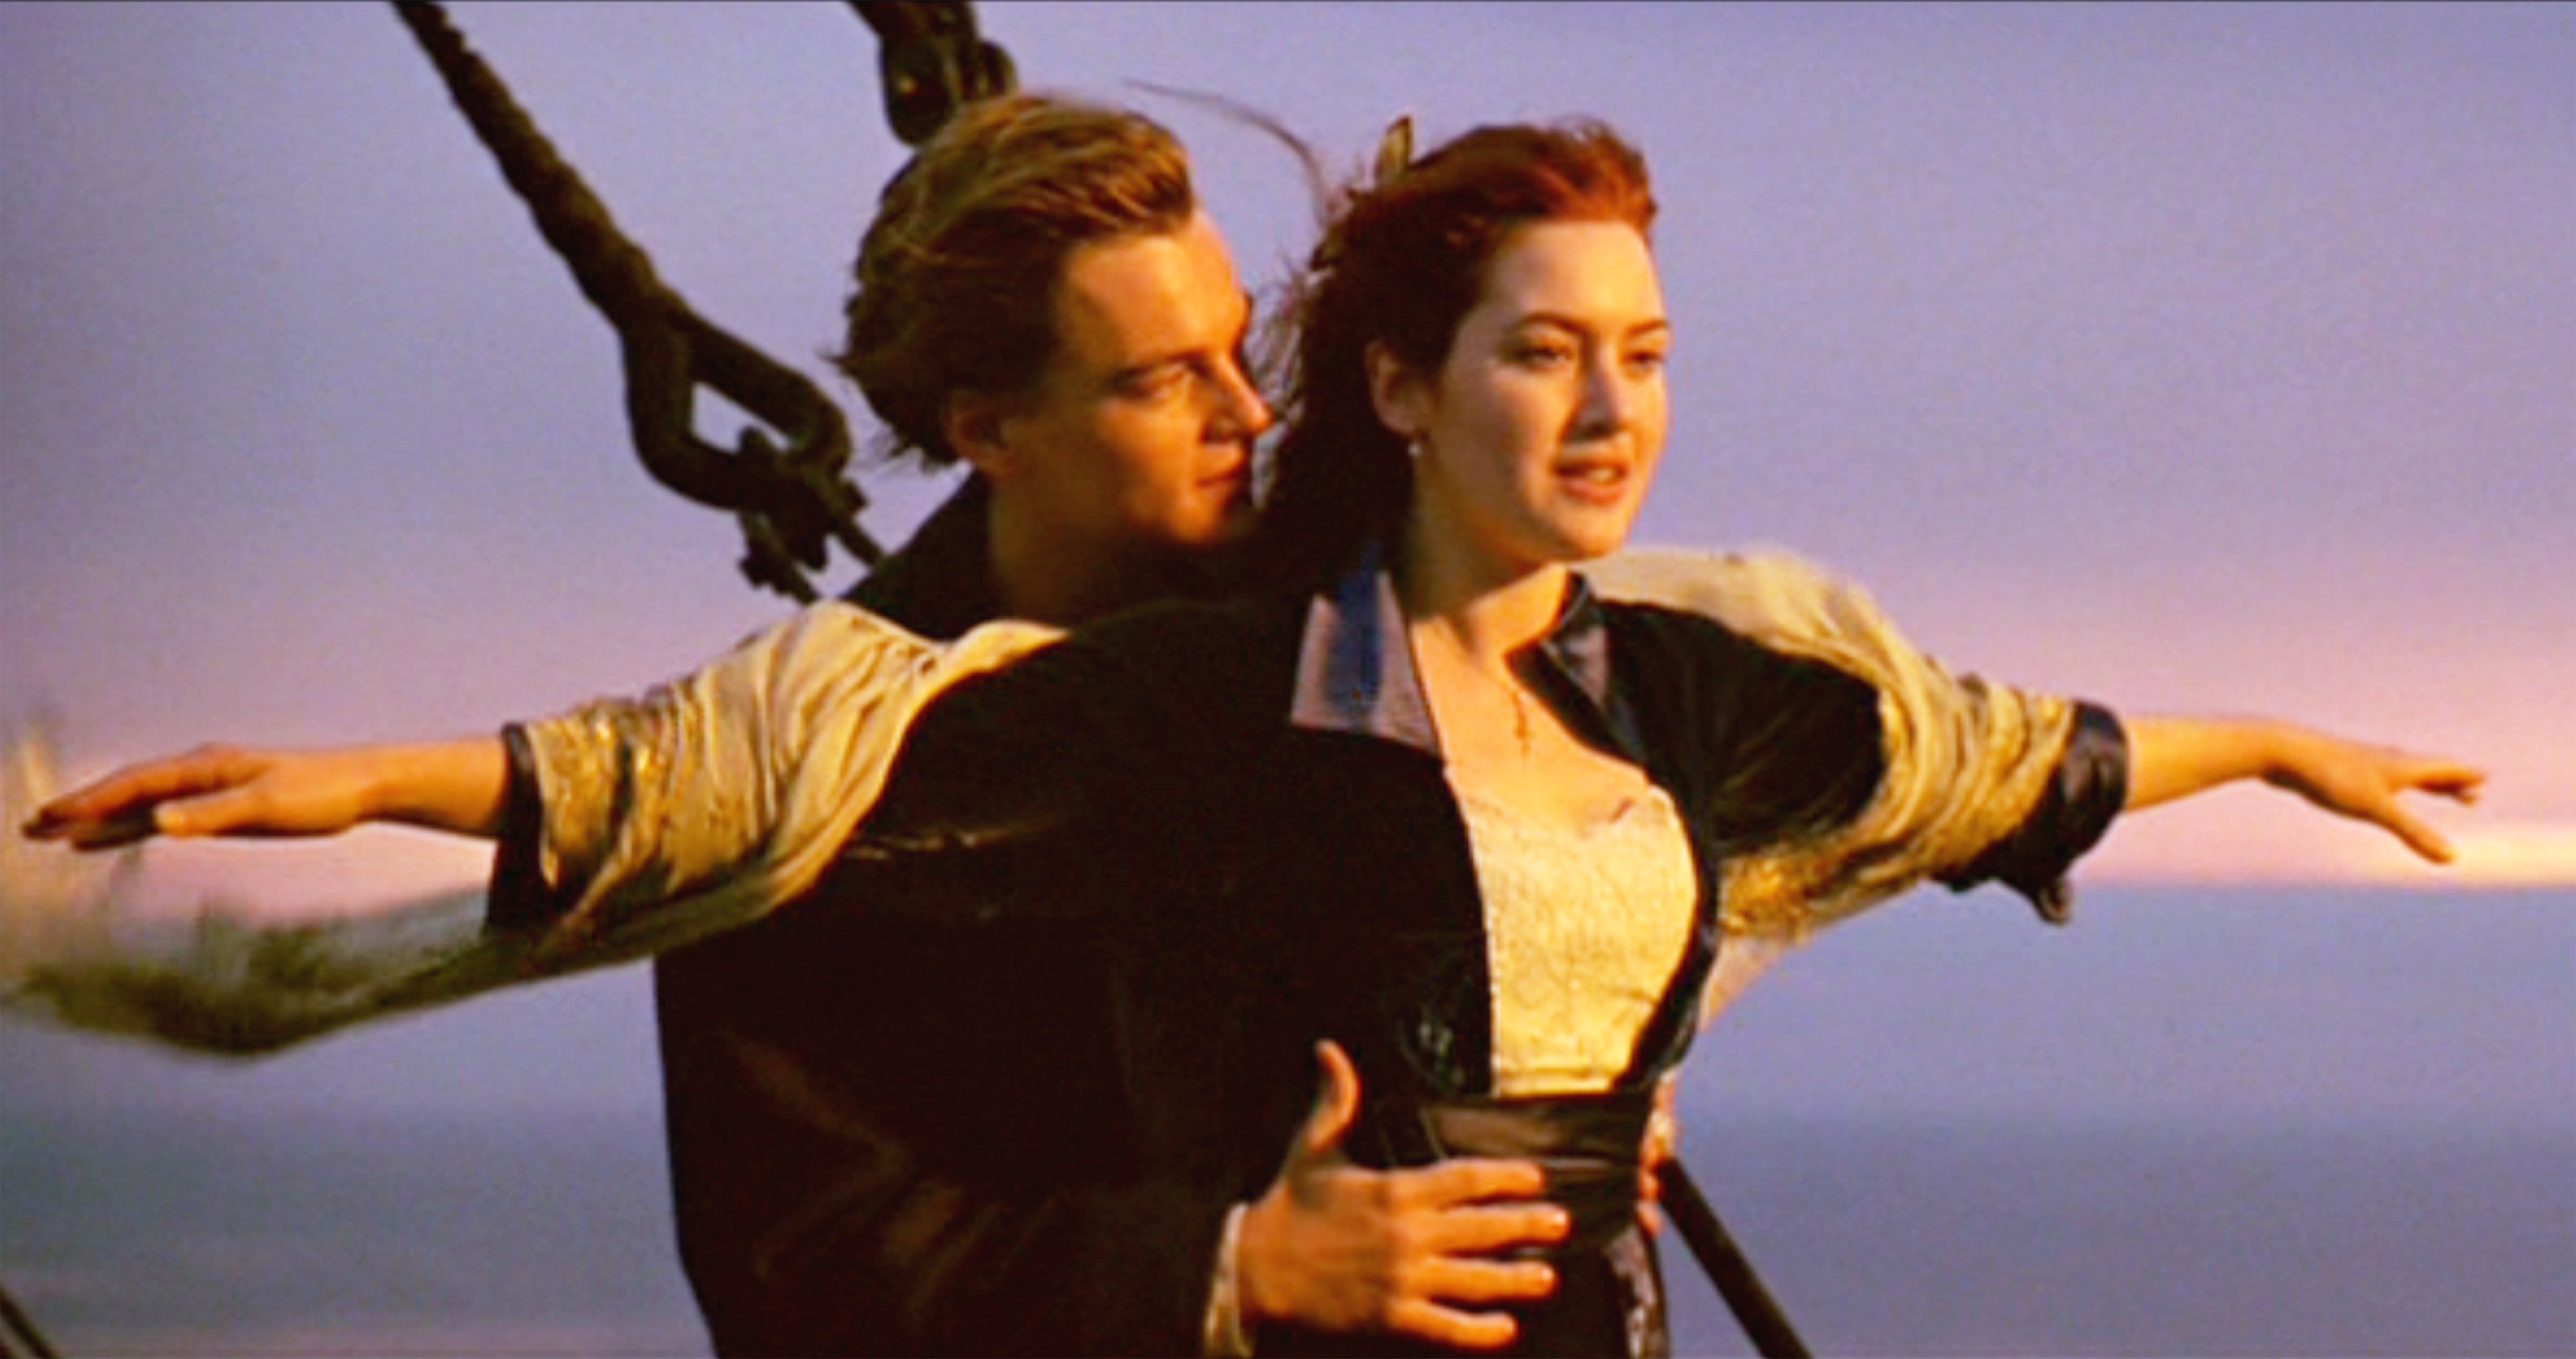 Leonardo DiCaprio and Kate Winslet in the 1997 movie "Titanic." | Source: Getty Images